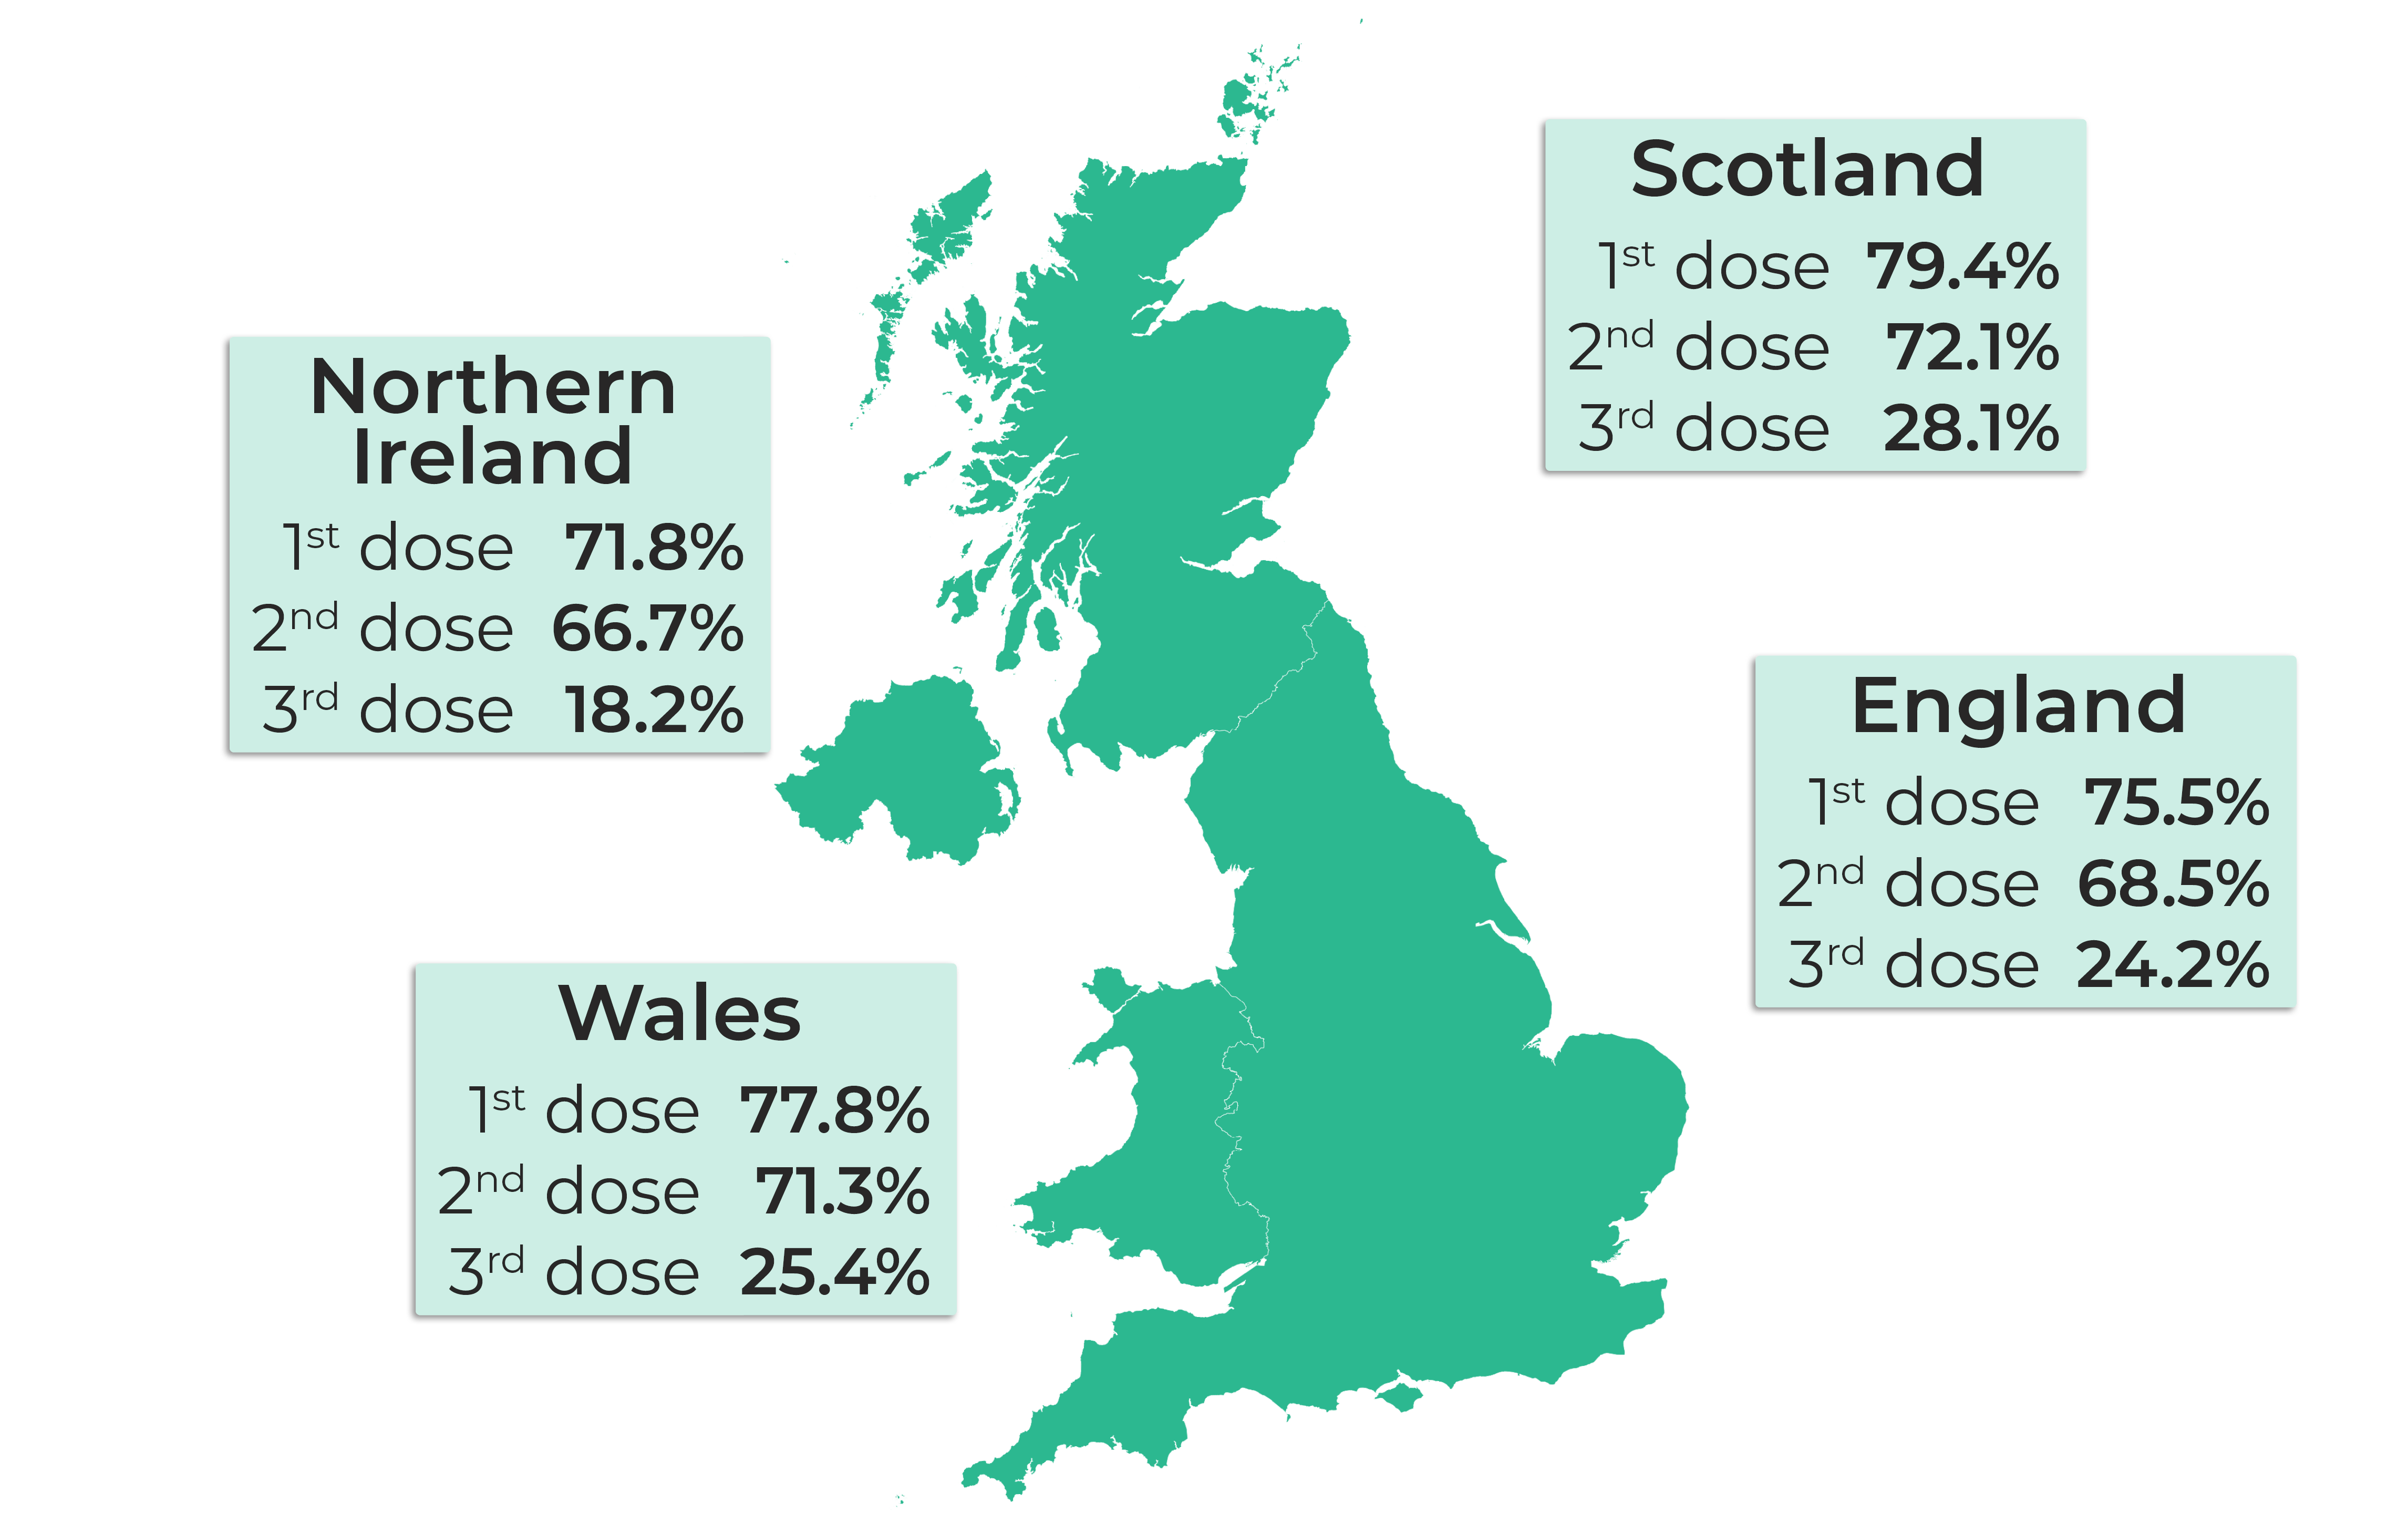 map showing the percentage of the total population across the United Kingdom as at 24 November 2021 who have received a first, second and third dose of a vaccine. This is broken down by the four individual nations. Wales 1st dose, 77.8%. Wales 2nd dose, 71.3%. Wales 3rd dose, 25.4%. England 1st dose, 75.5%. England 2nd dose, 68.5%. England 3rd dose, 24.2%. Scotland 1st dose, 75.5%. Scotland 2nd dose, 72.1%. Scotland 3rd dose, 28.1%. Northern Ireland 1st dose, 71.8%. Northern Ireland 2nd dose, 66.7%. Northern Ireland 3rd dose, 18.2%.